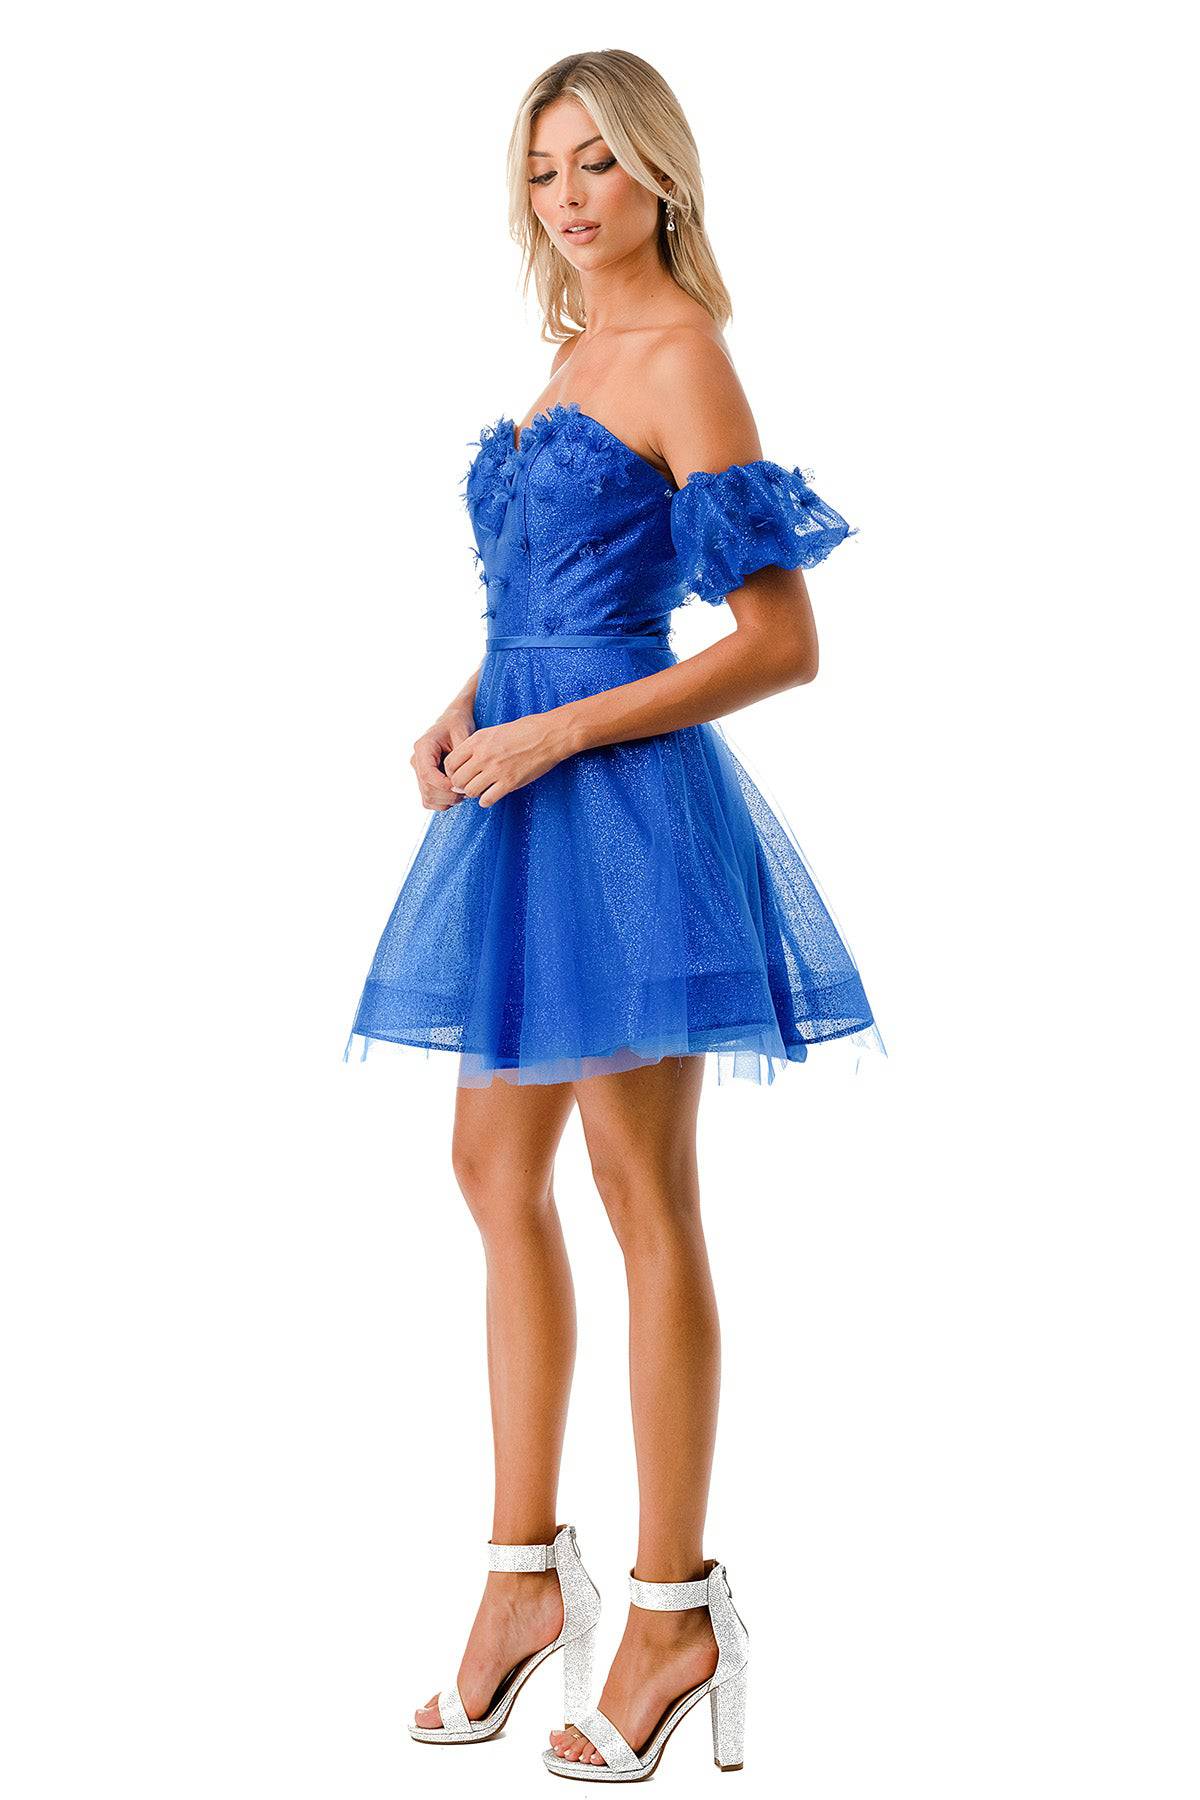 All About Dancing Royal Blue Halter Ruffled Mini Dress